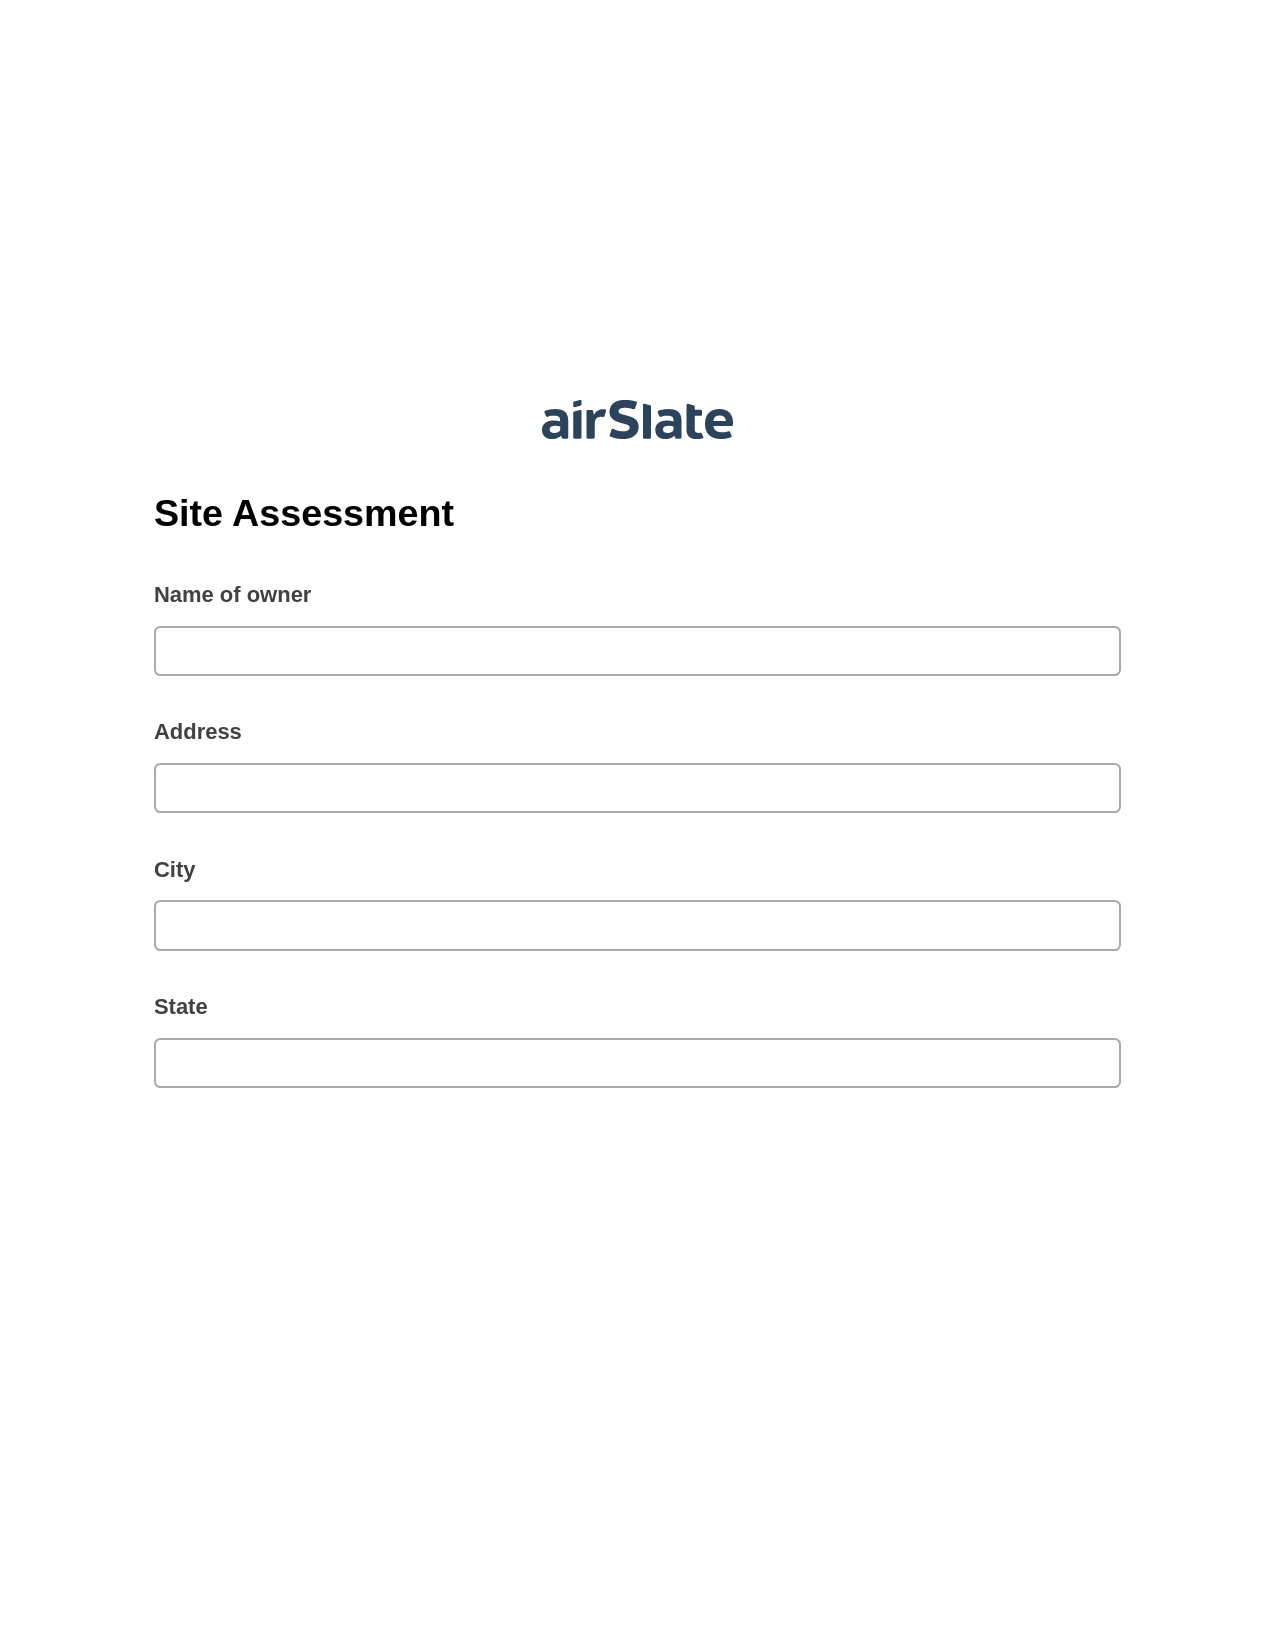 Site Assessment Pre-fill from Smartsheet Bot, Lock the slate bot, Export to Smartsheet